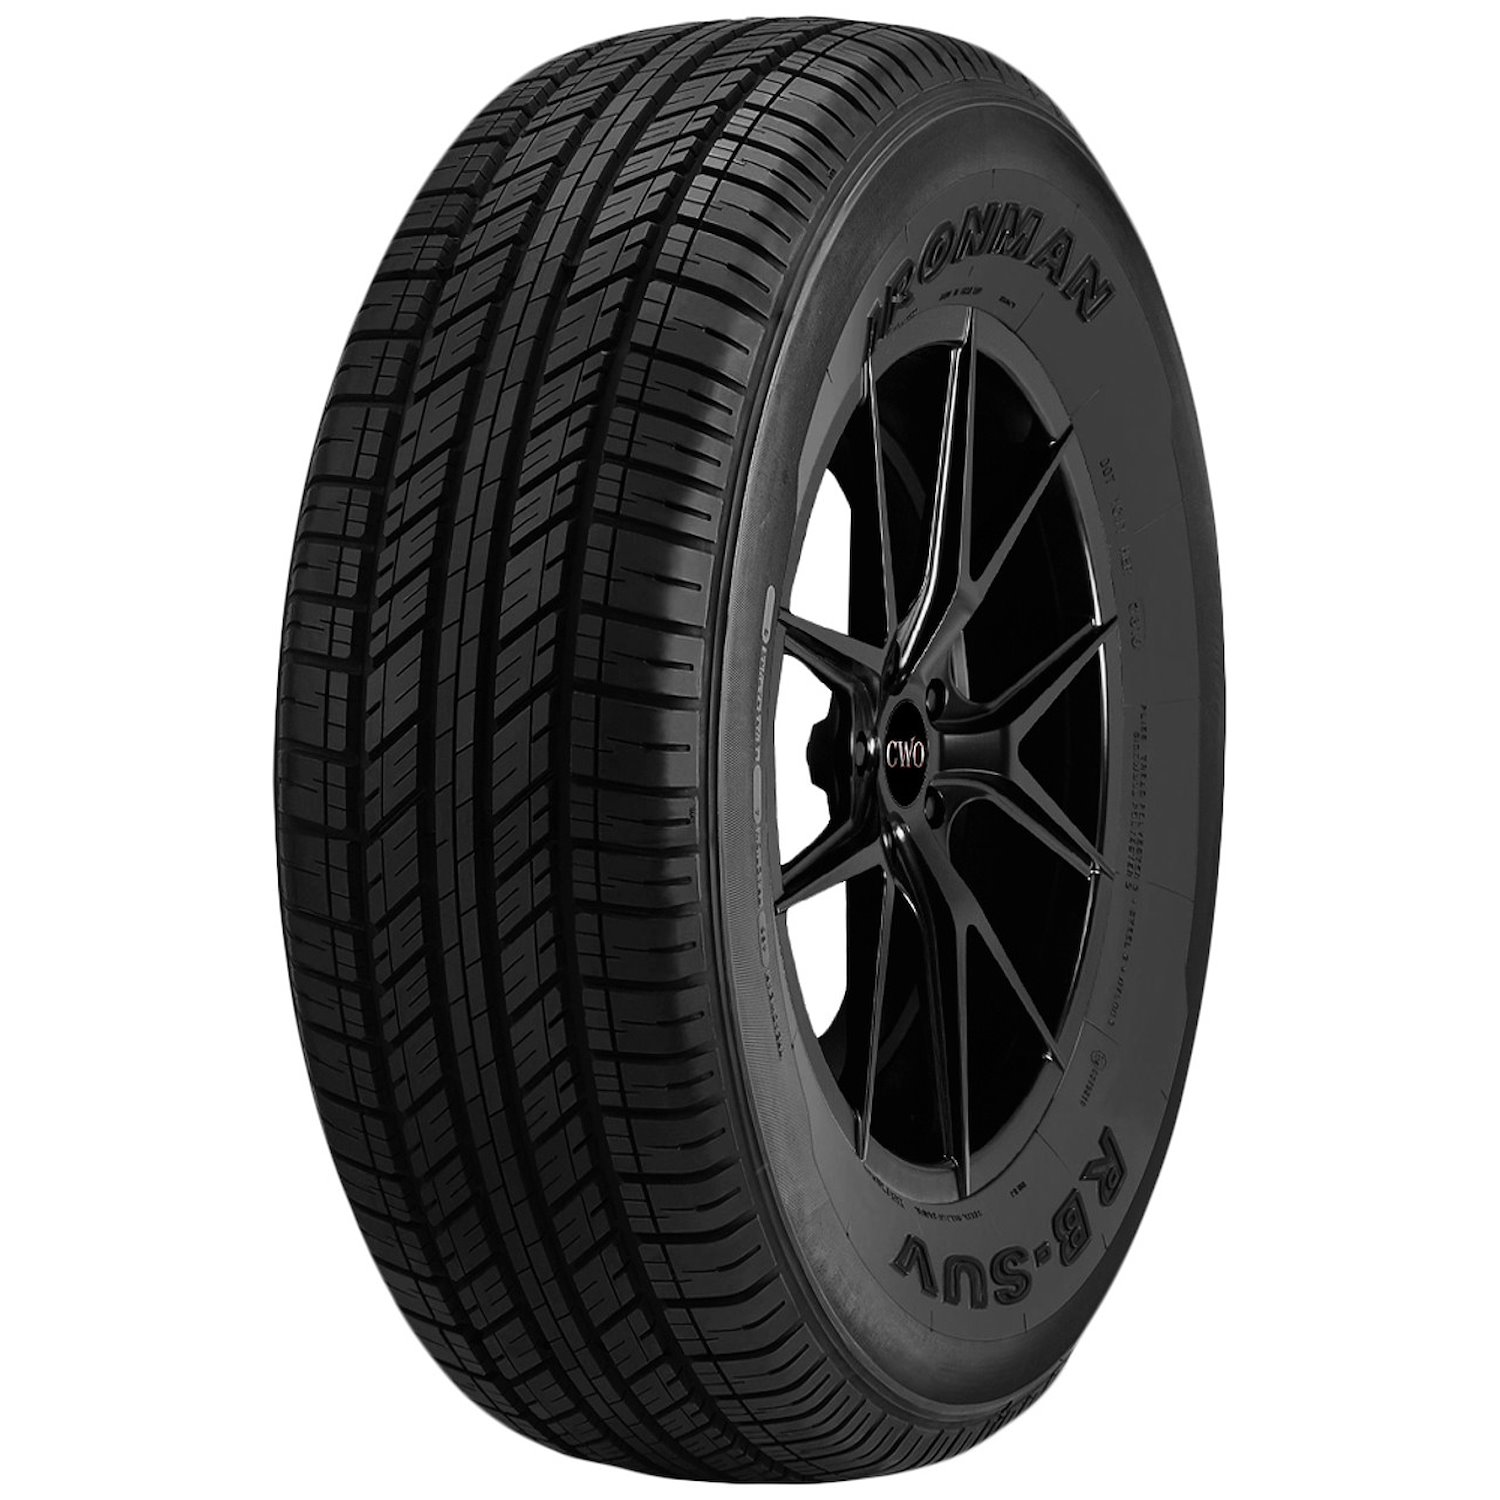 RB SUV Tire, 275/60R20 115H